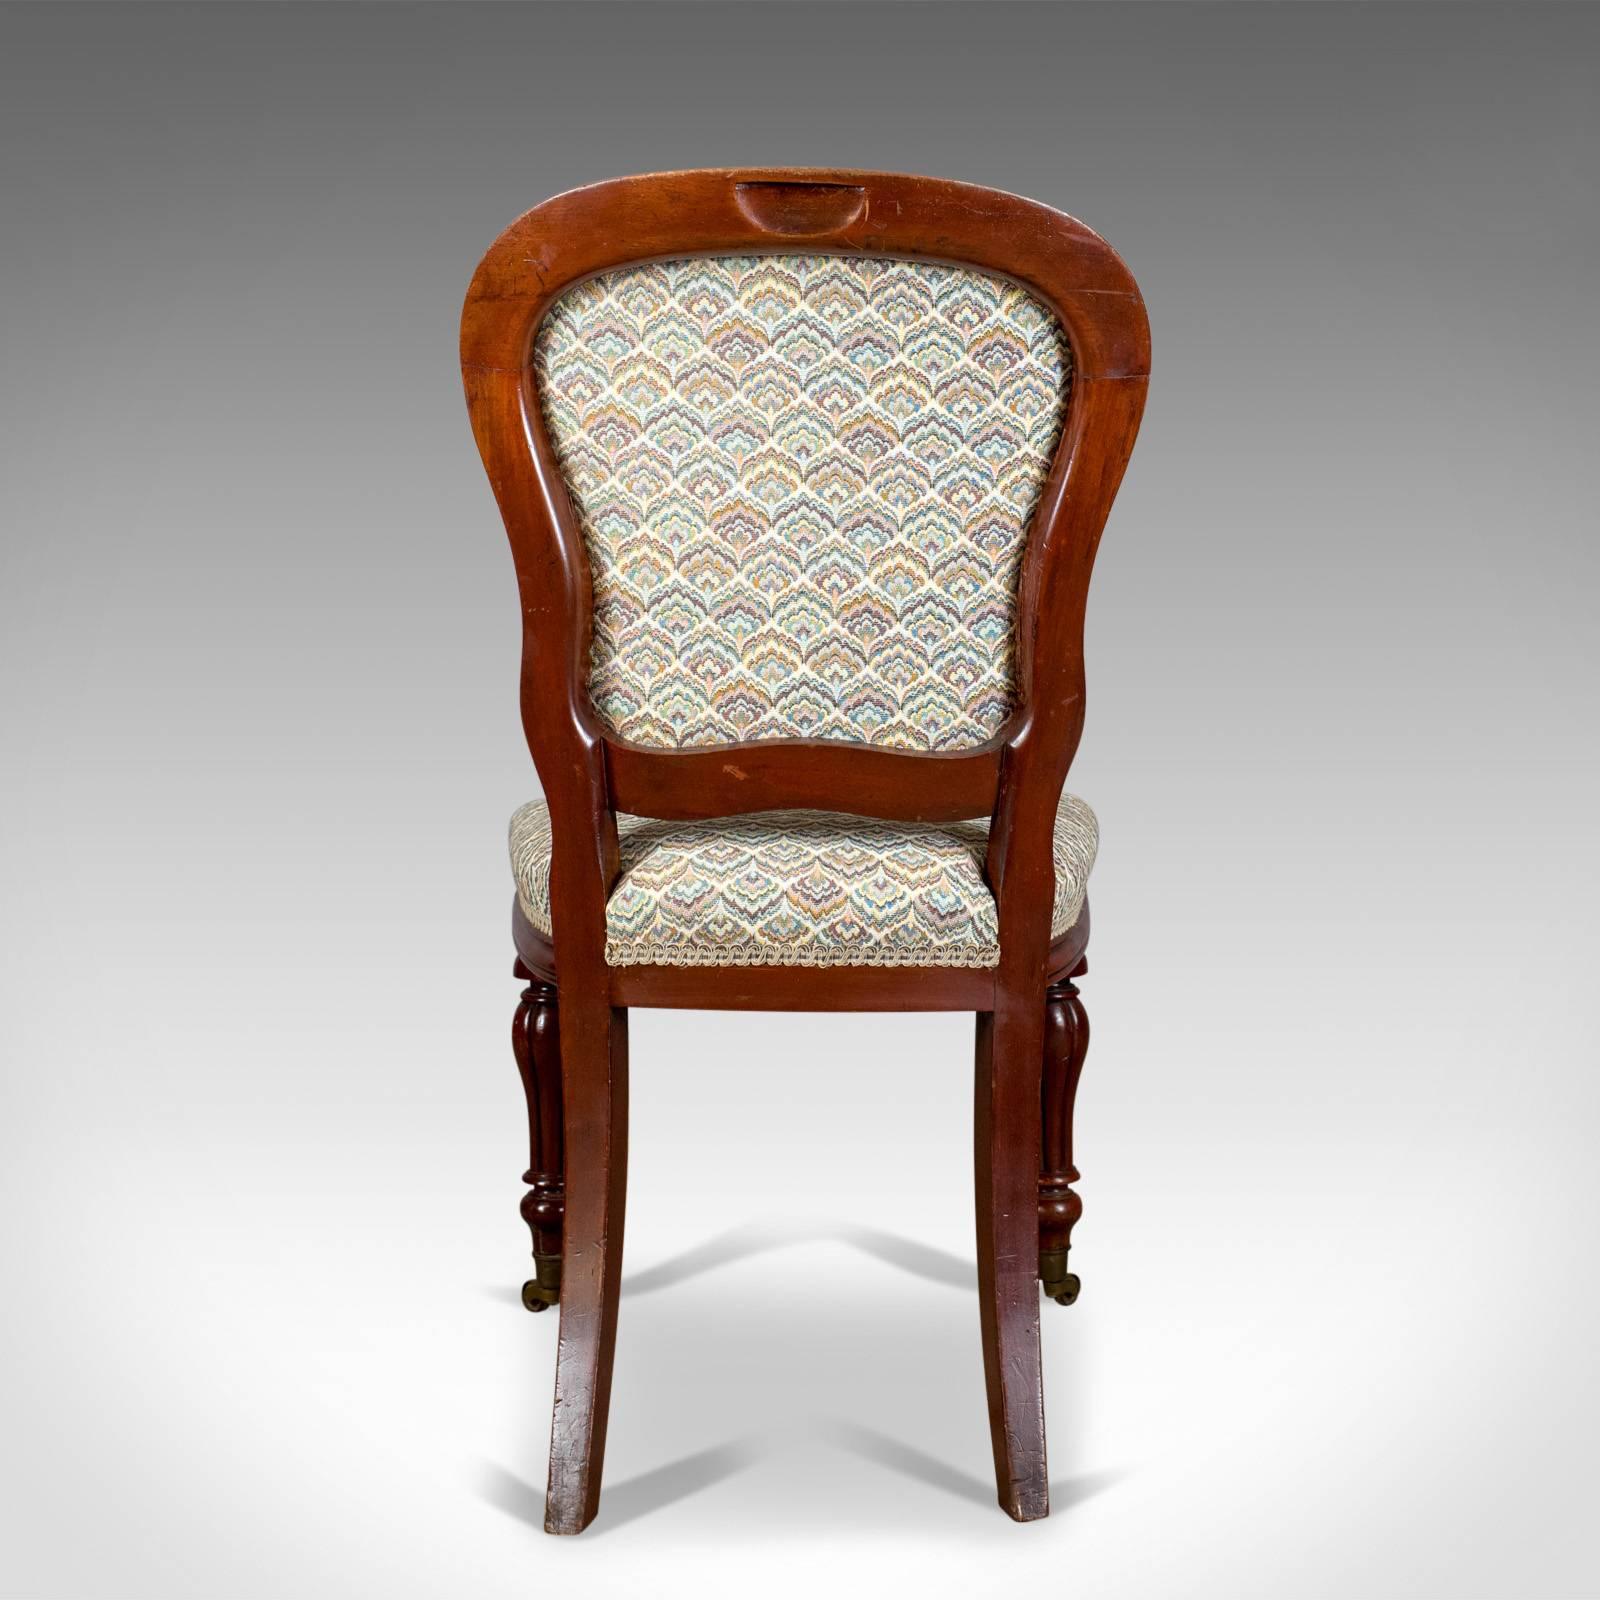 English Pair of Chairs, William IV, Mahogany, Button Back, Parlour, Side, circa 1835